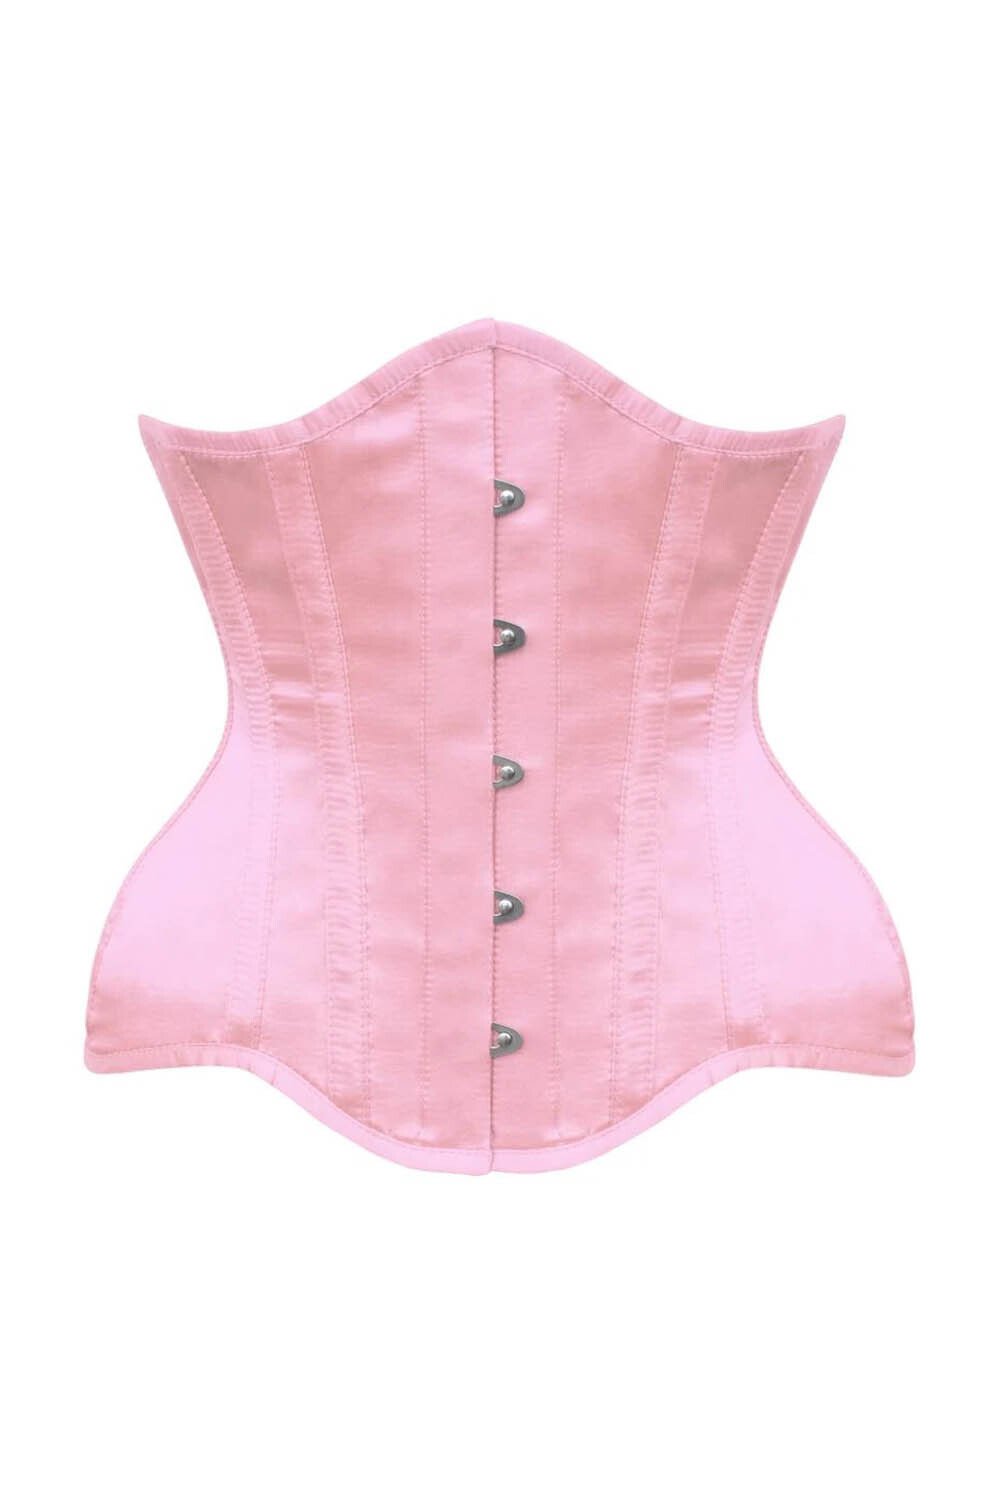 corset underbust C215 in pink satin edged with black - Boho-Chic Clothing